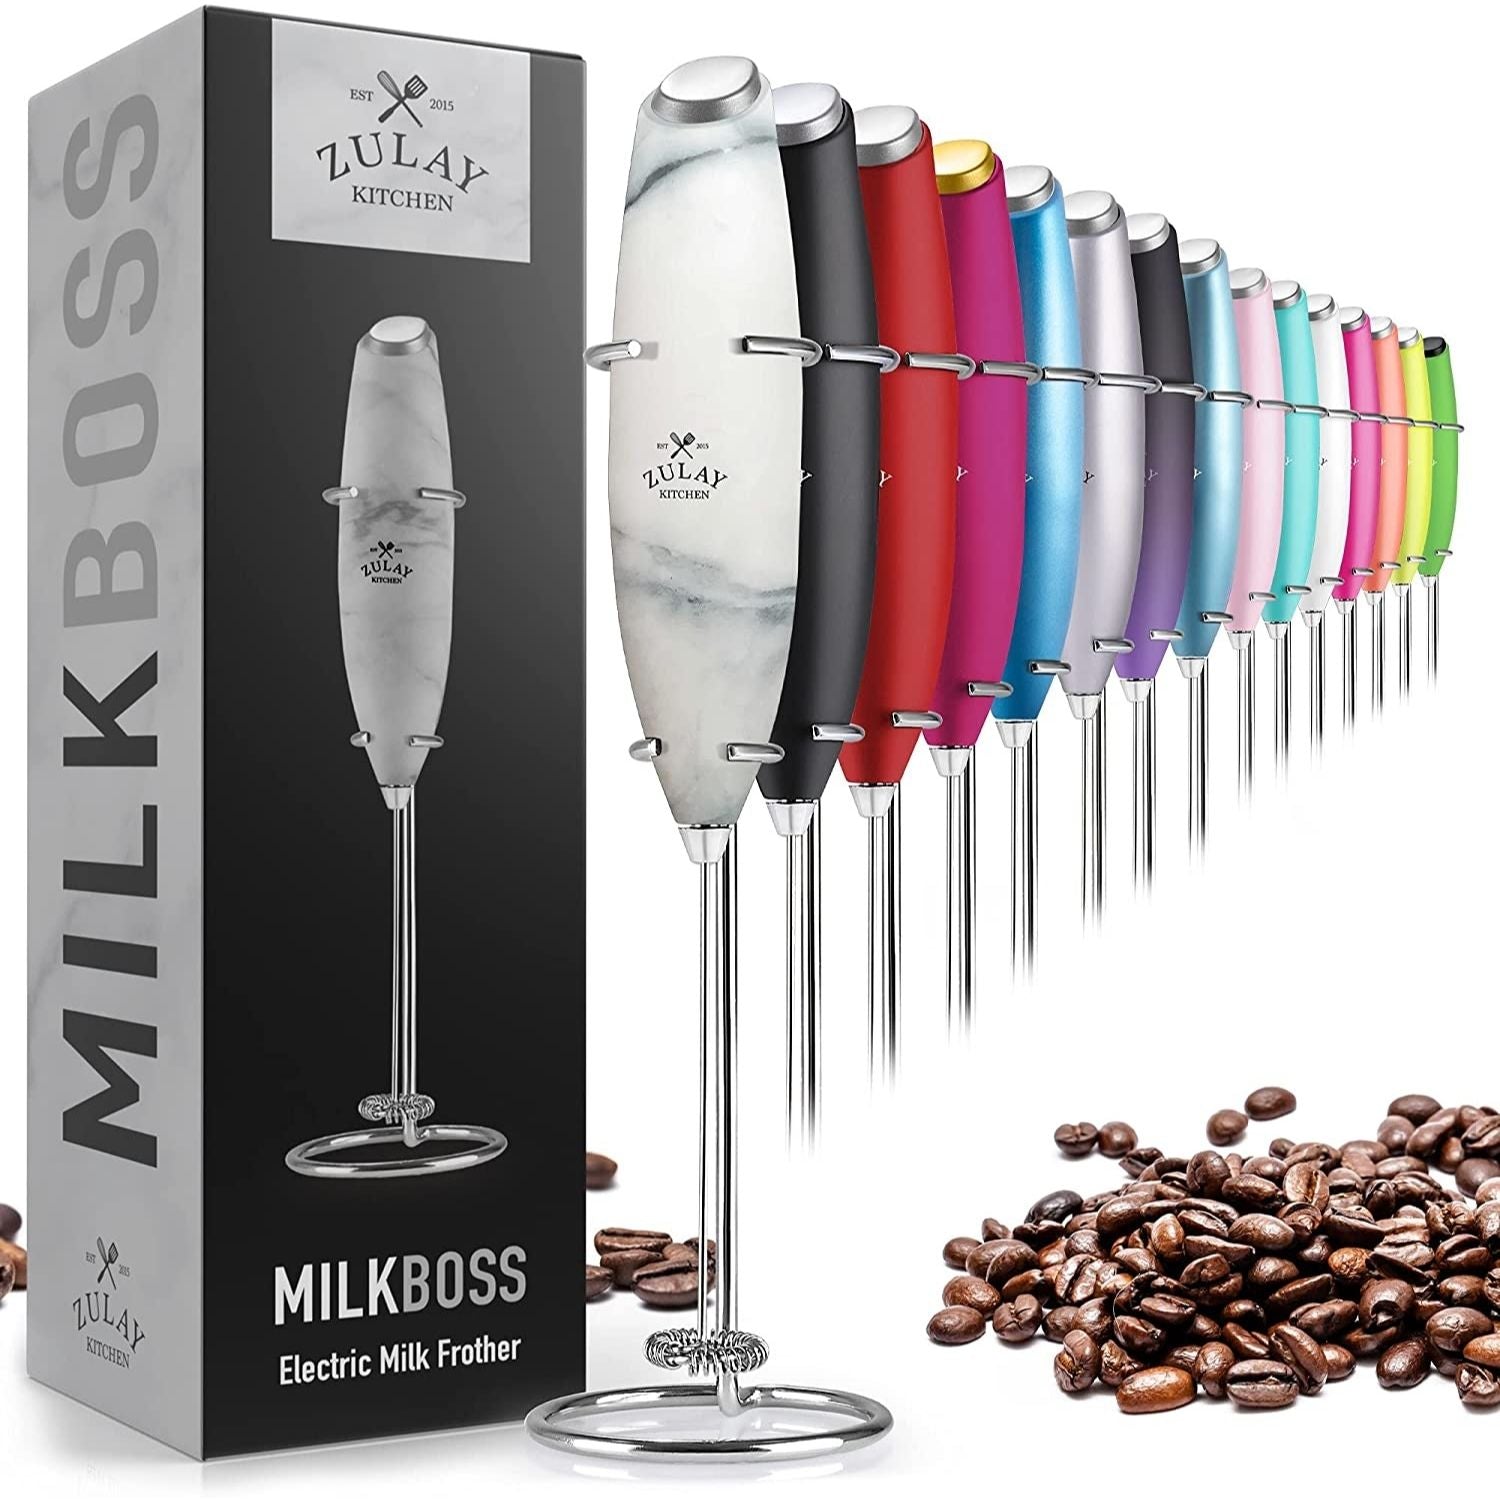 Zulay Kitchen Premium Milk Frother With Stand